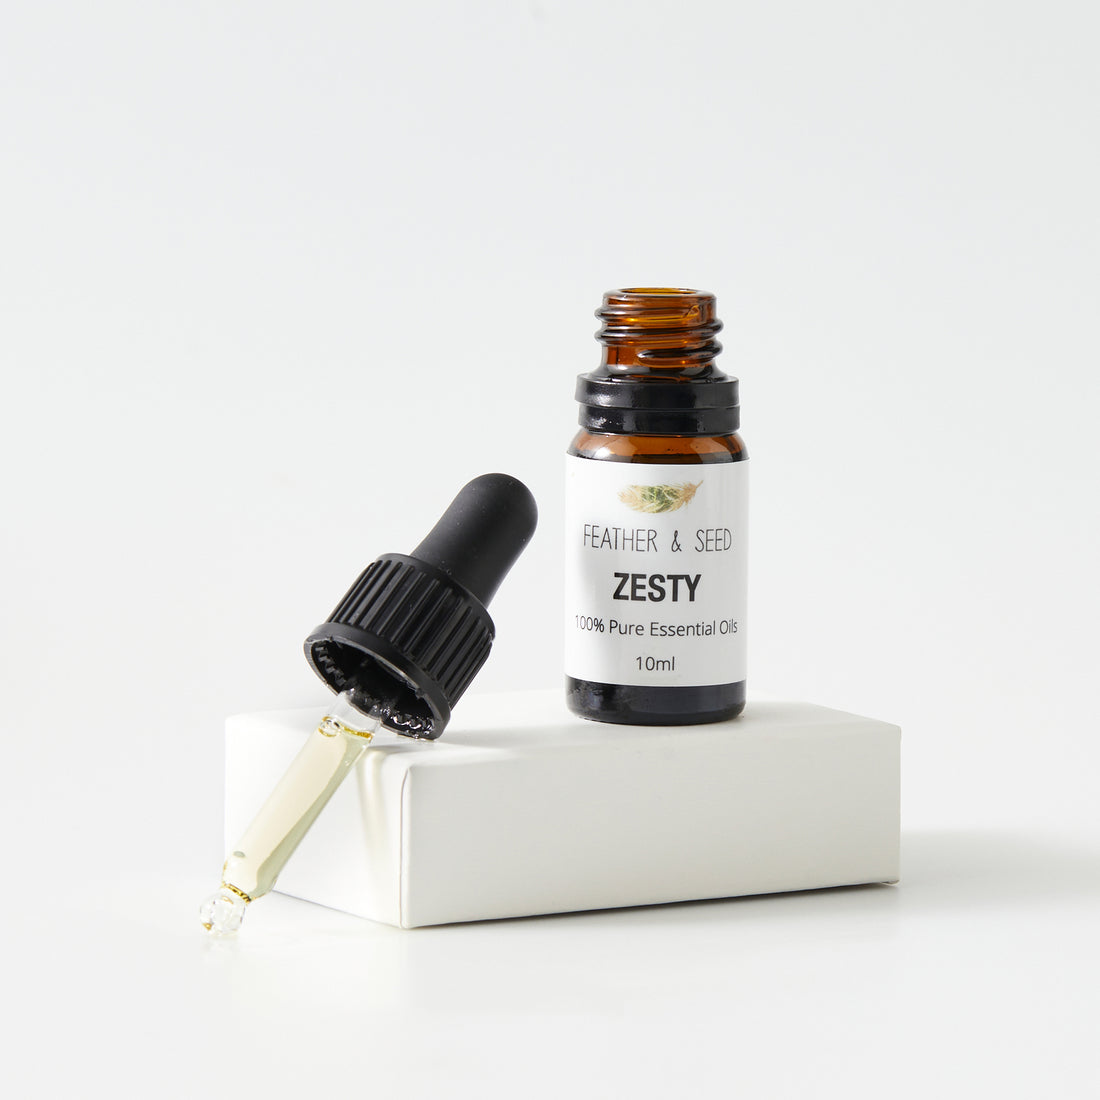 Feather & Seed Zesty 100% pure essential oils